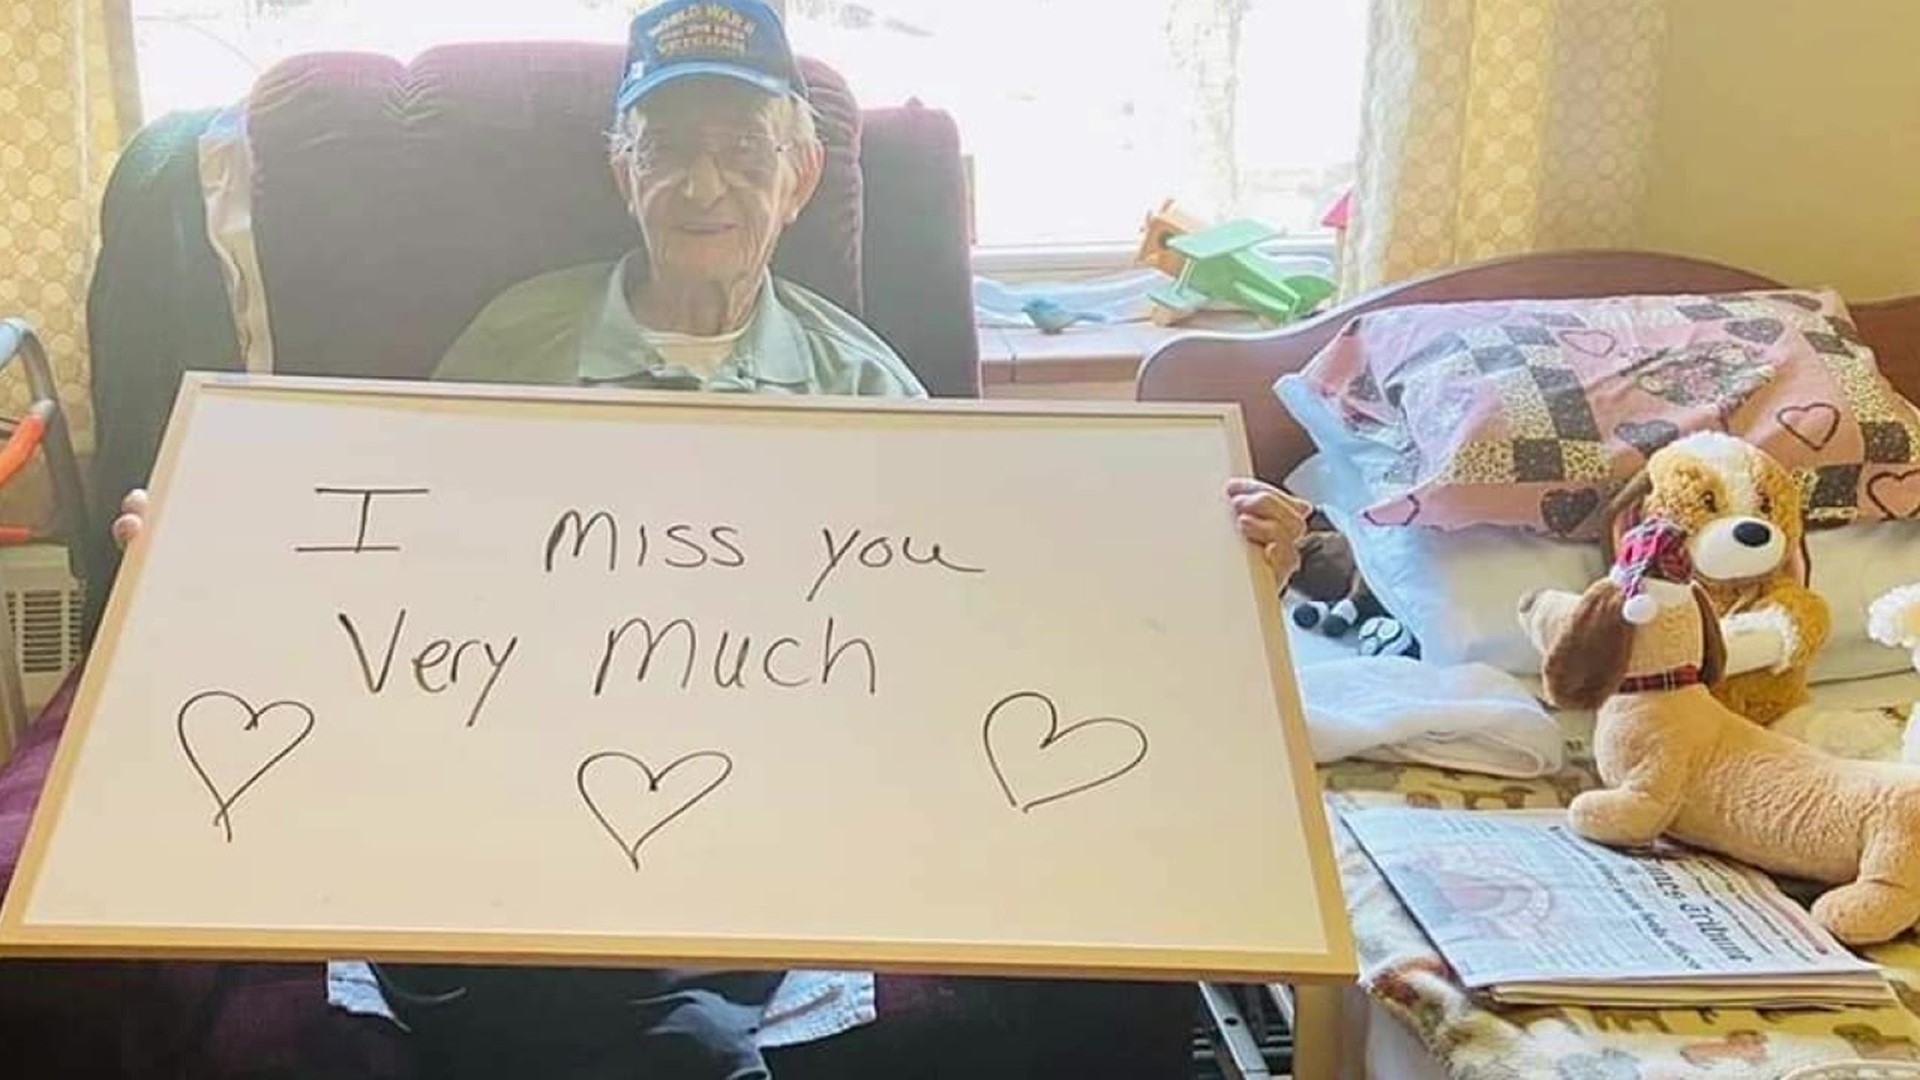 The vet fought in the Battle of the Bulge and now beat COVID-19 by receiving cards to lift his spirits.